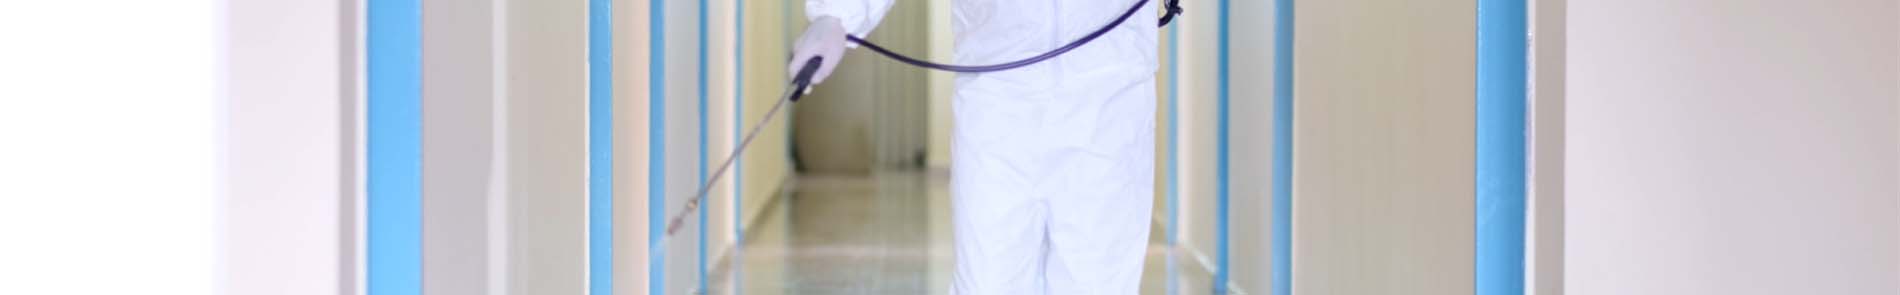 fumigation services in uae